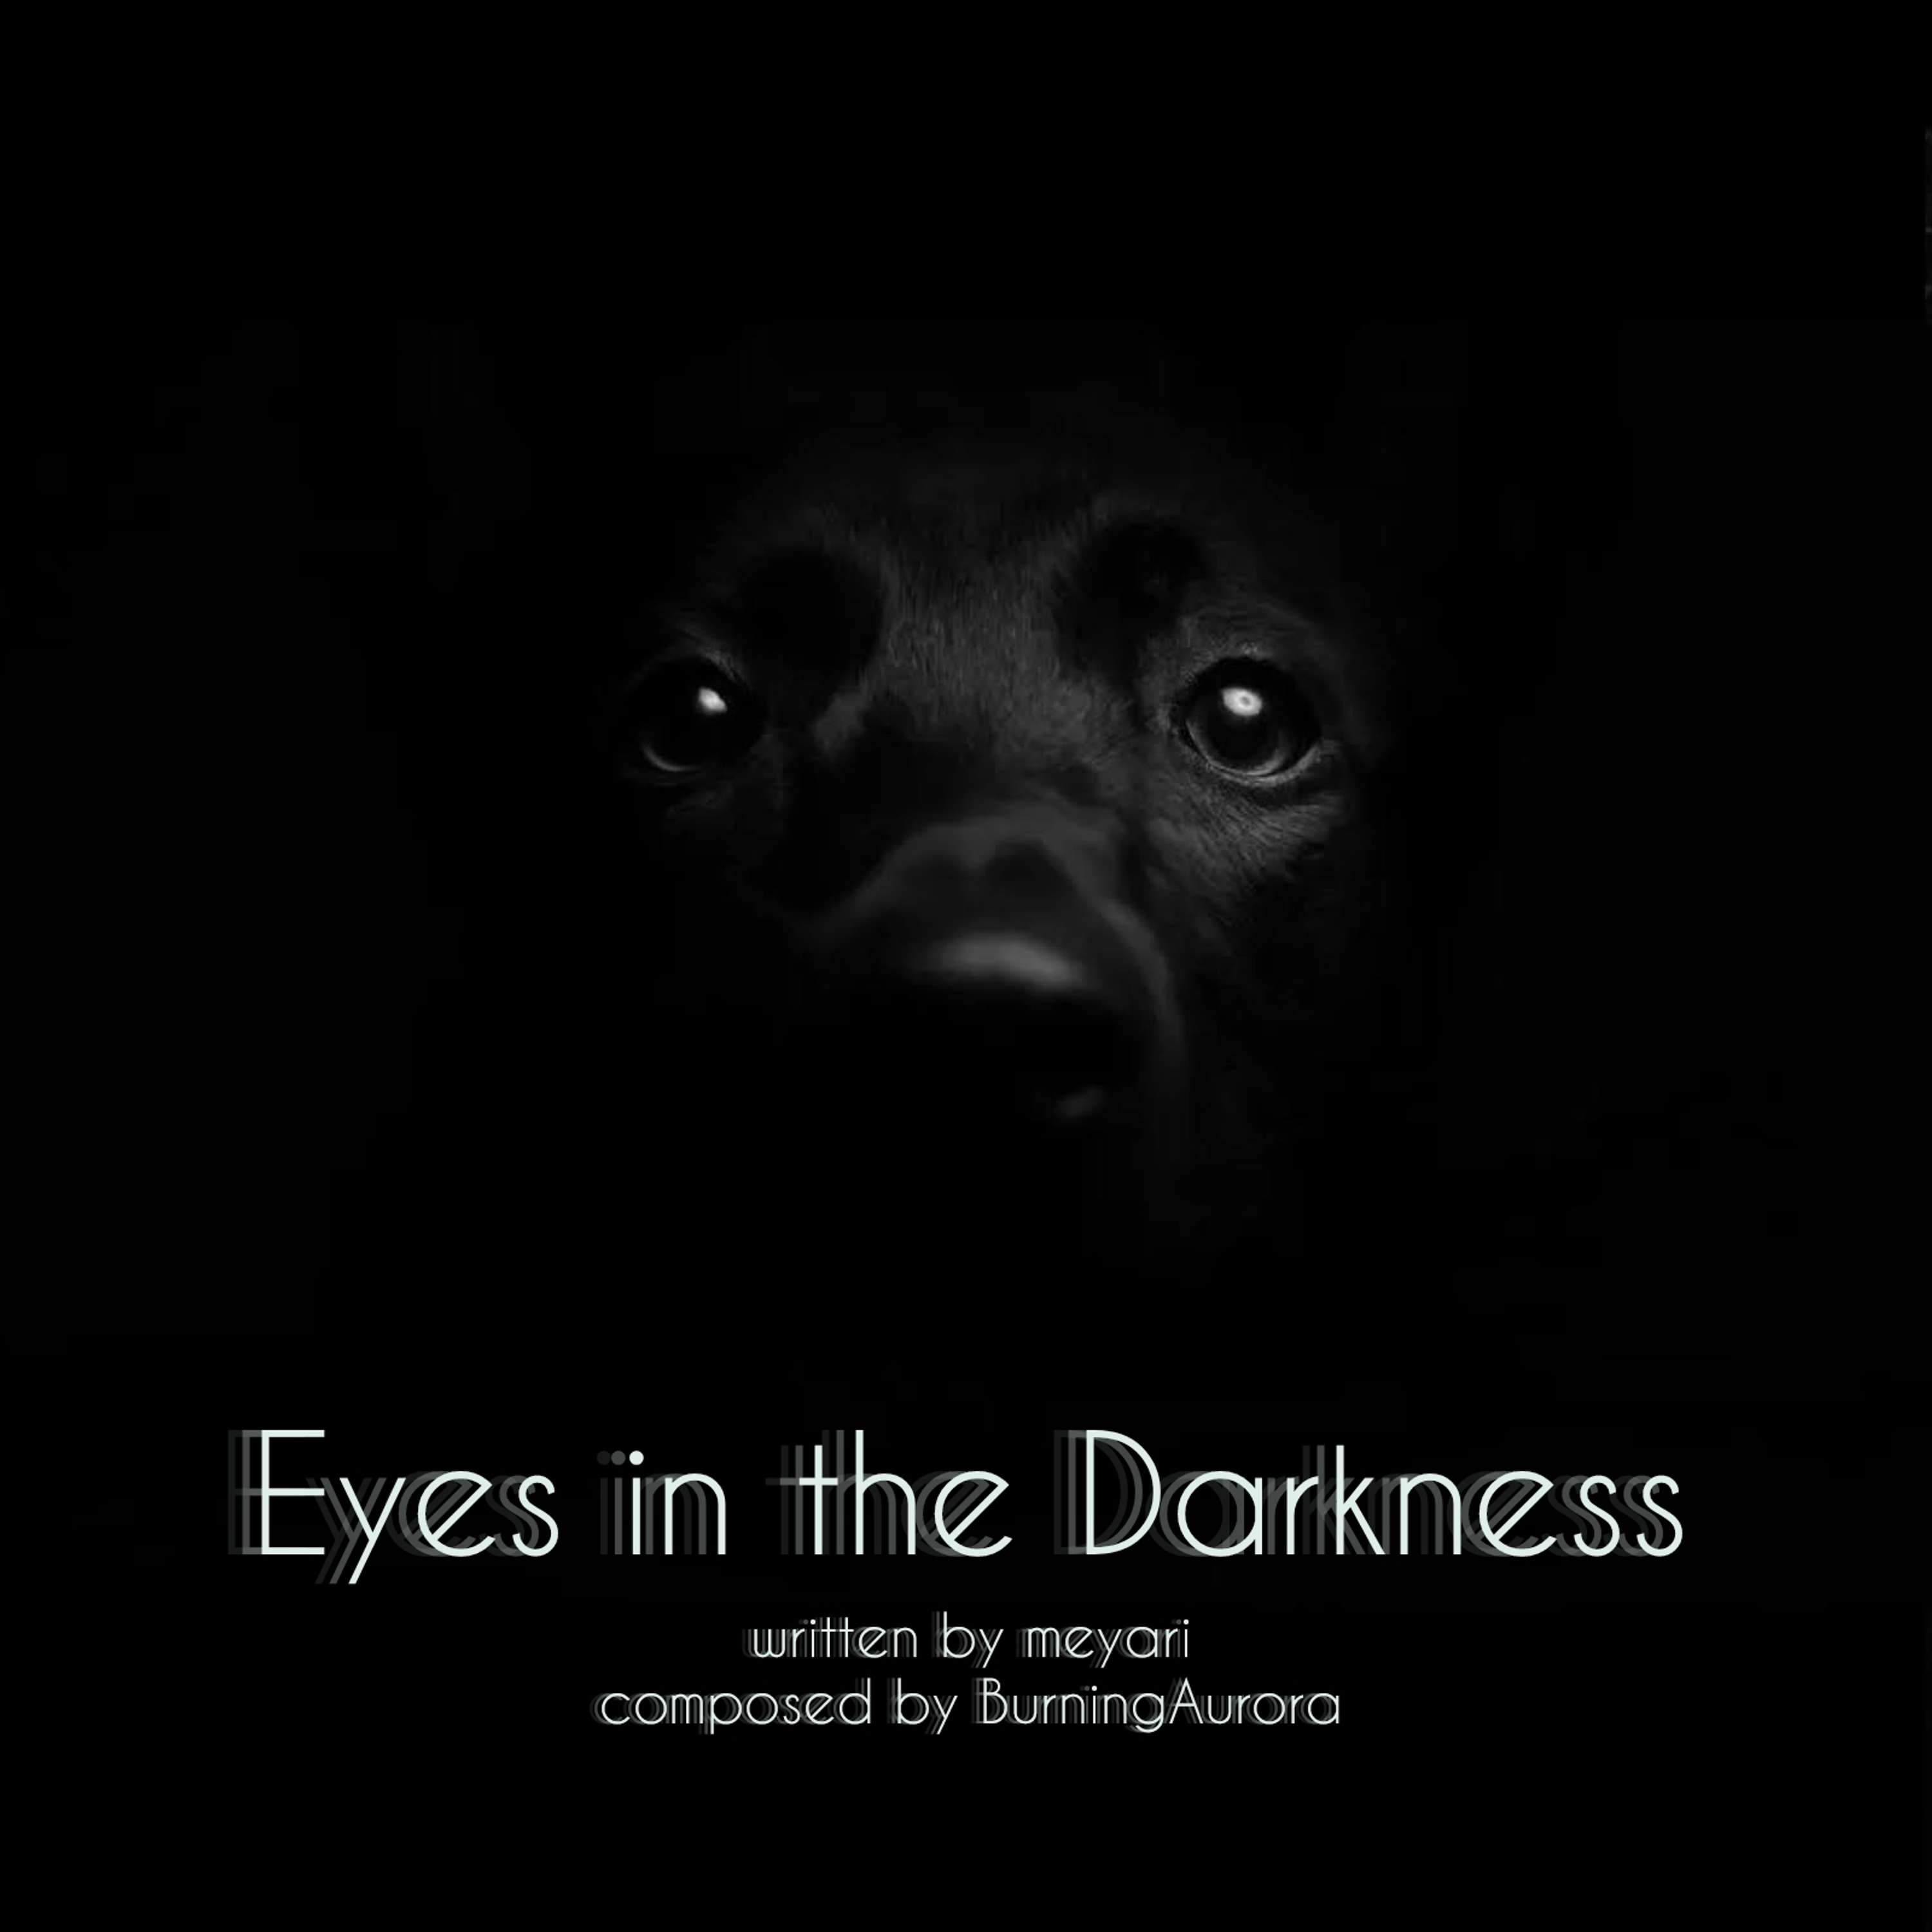 Eyes in the Darkness by meyari